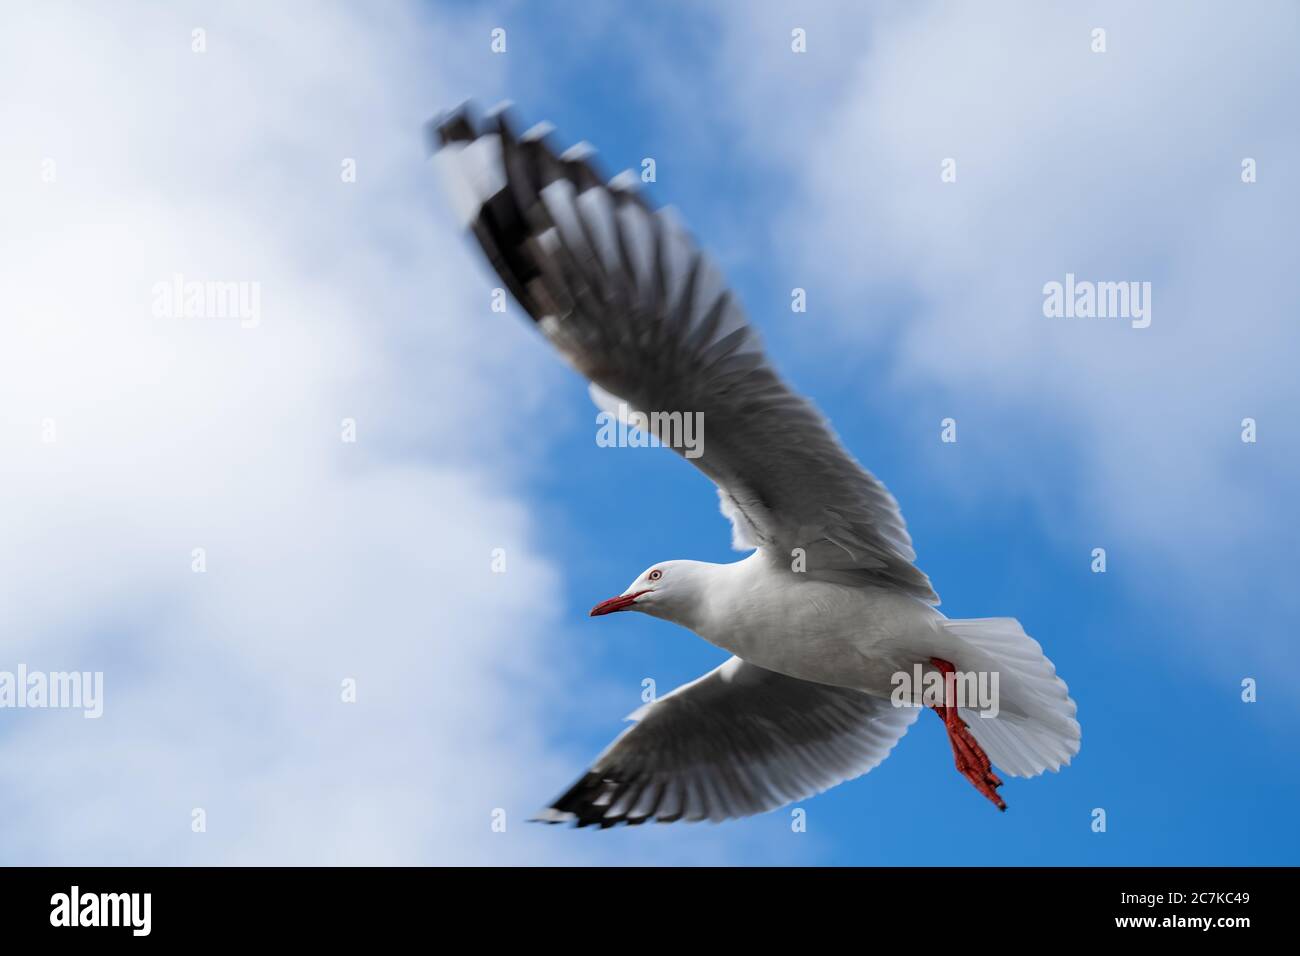 Red-billed gull flying with blue sky and cloud at Christchurch, New Zealand. Stock Photo